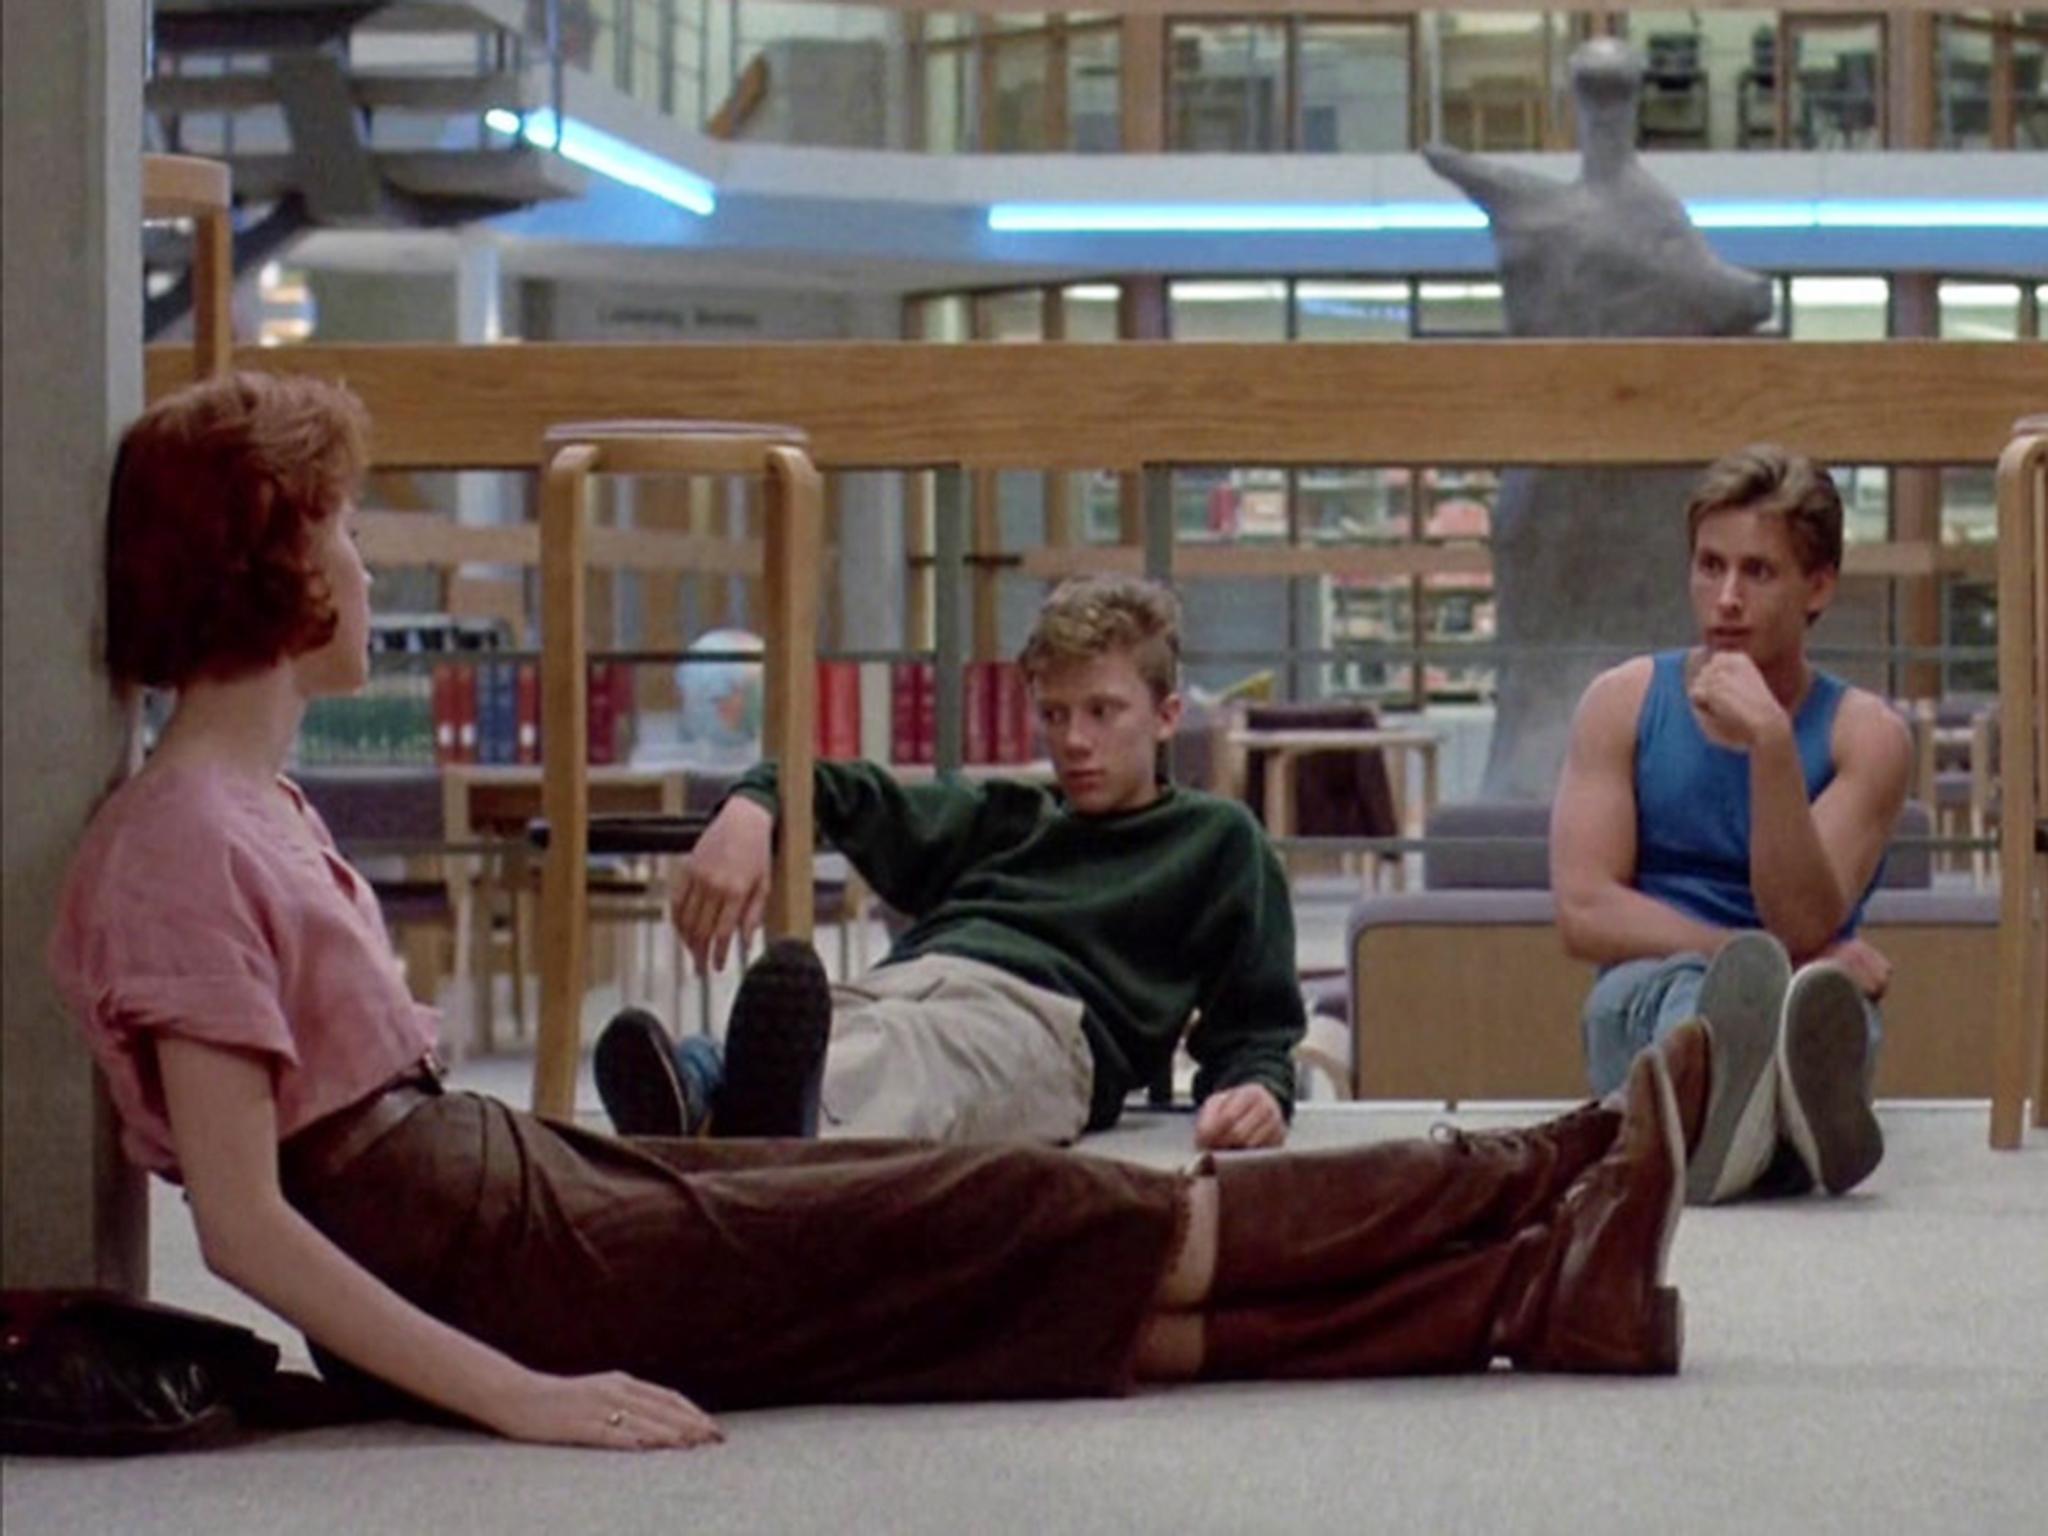 The Breakfast Club Deleted Scene Shows Molly Ringwald And Ally Sheedy